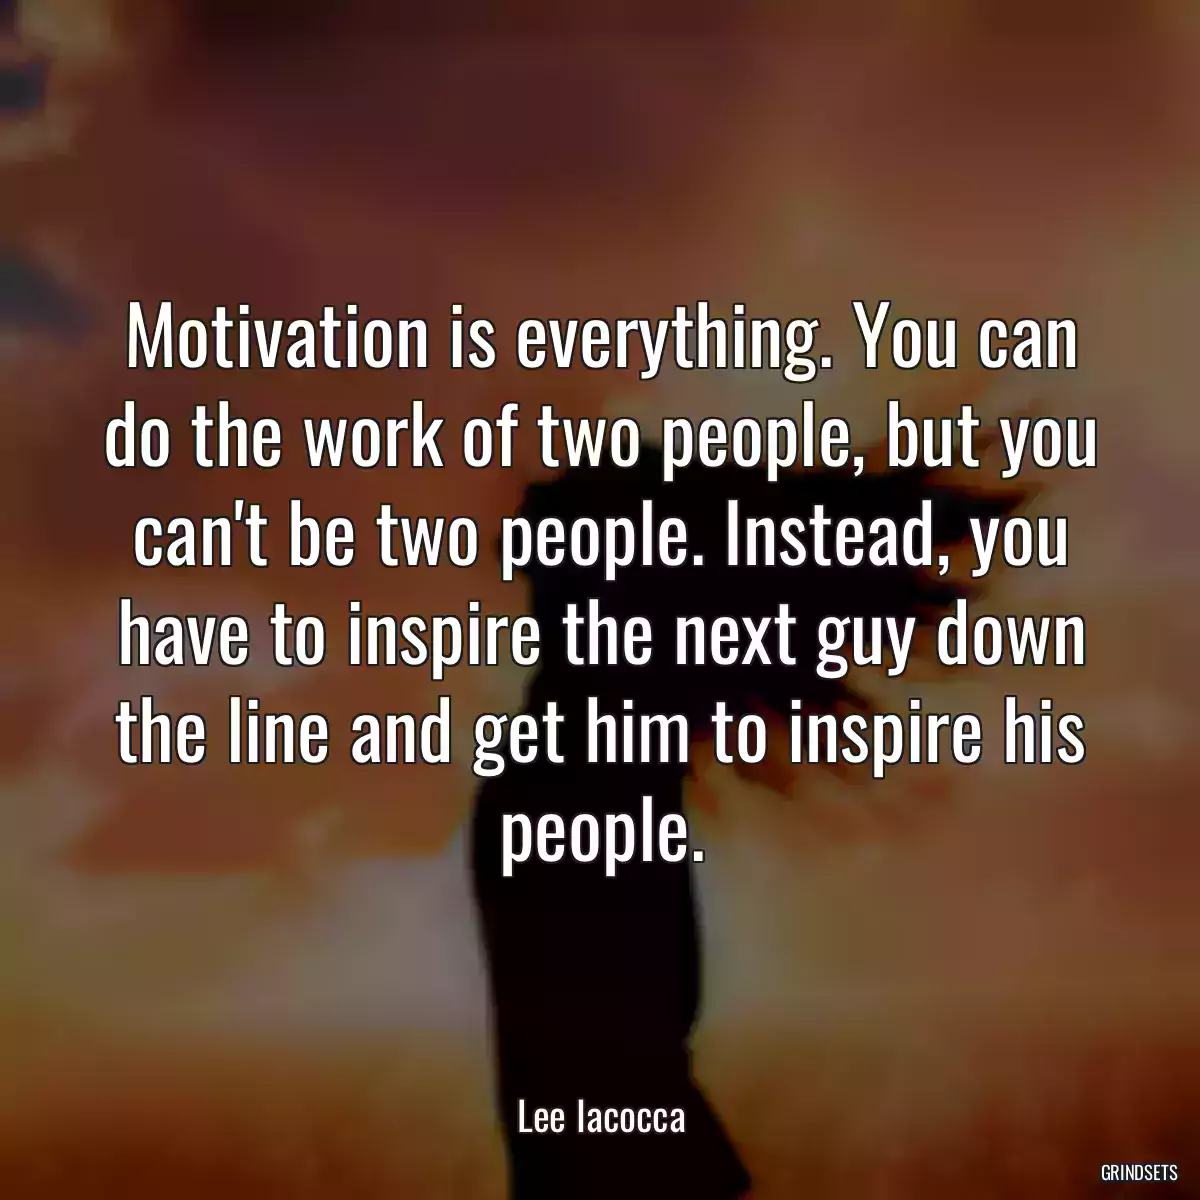 Motivation is everything. You can do the work of two people, but you can\'t be two people. Instead, you have to inspire the next guy down the line and get him to inspire his people.